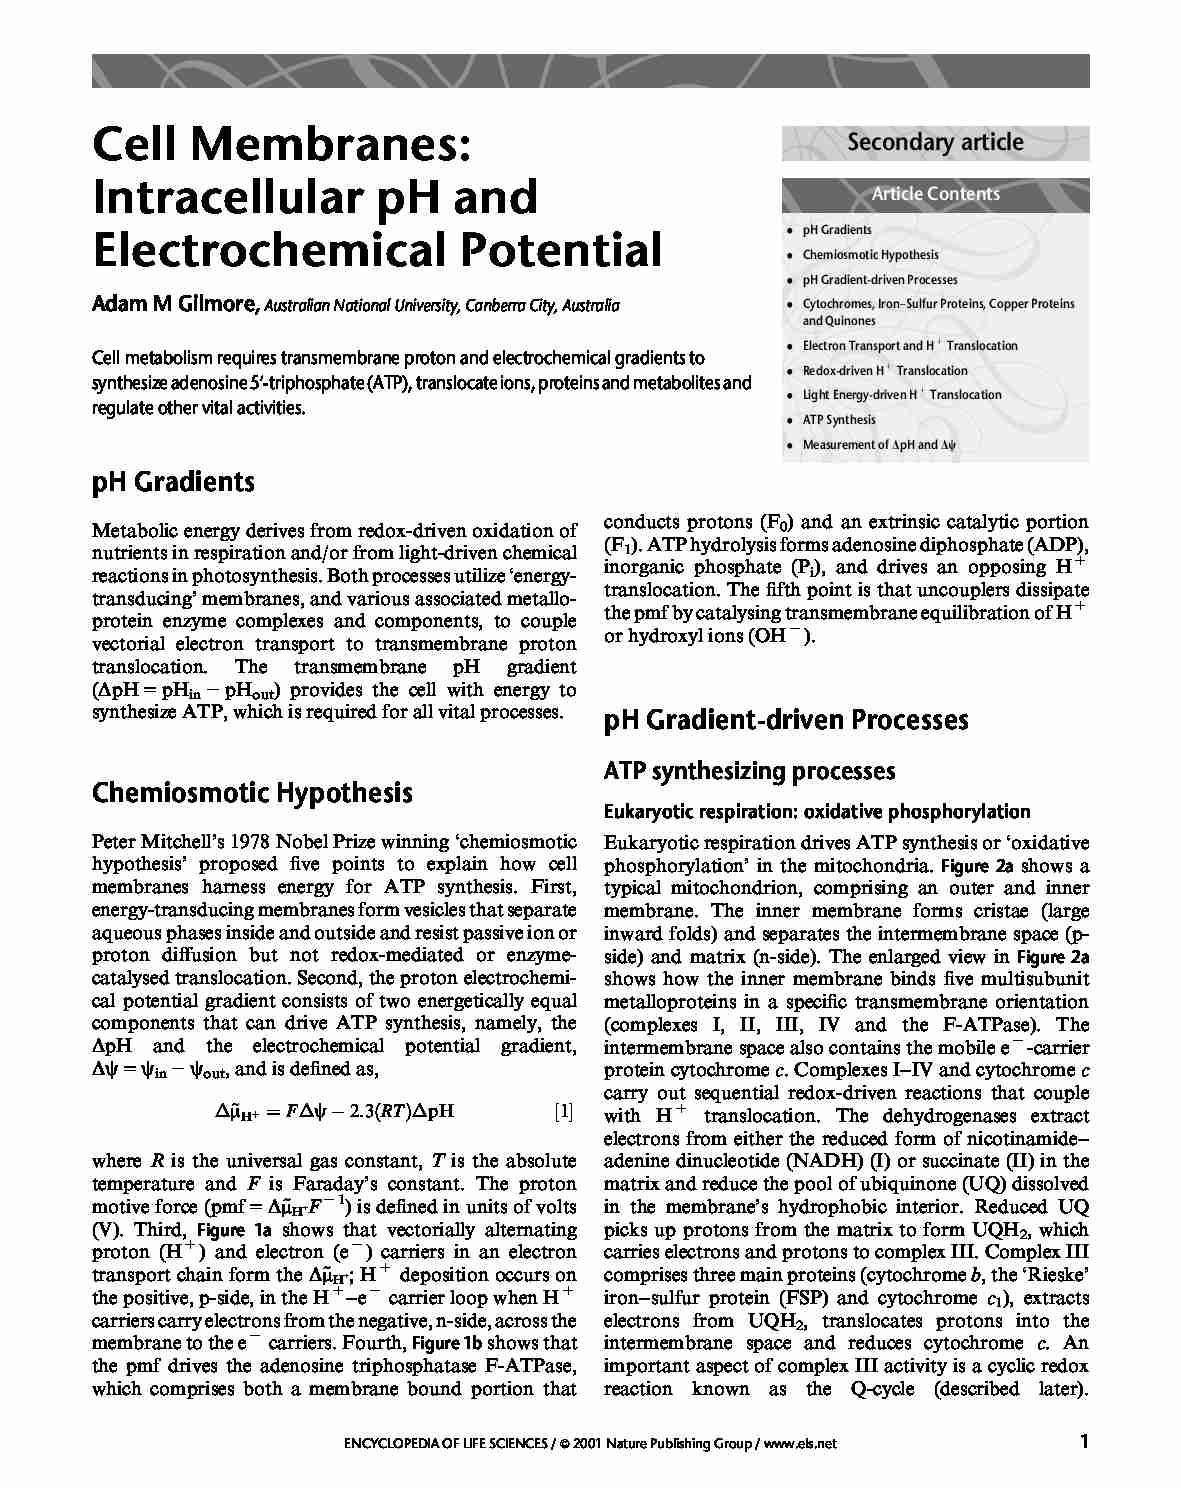 Cell membranes pH and electrochem potential-opracowanie - strona 1